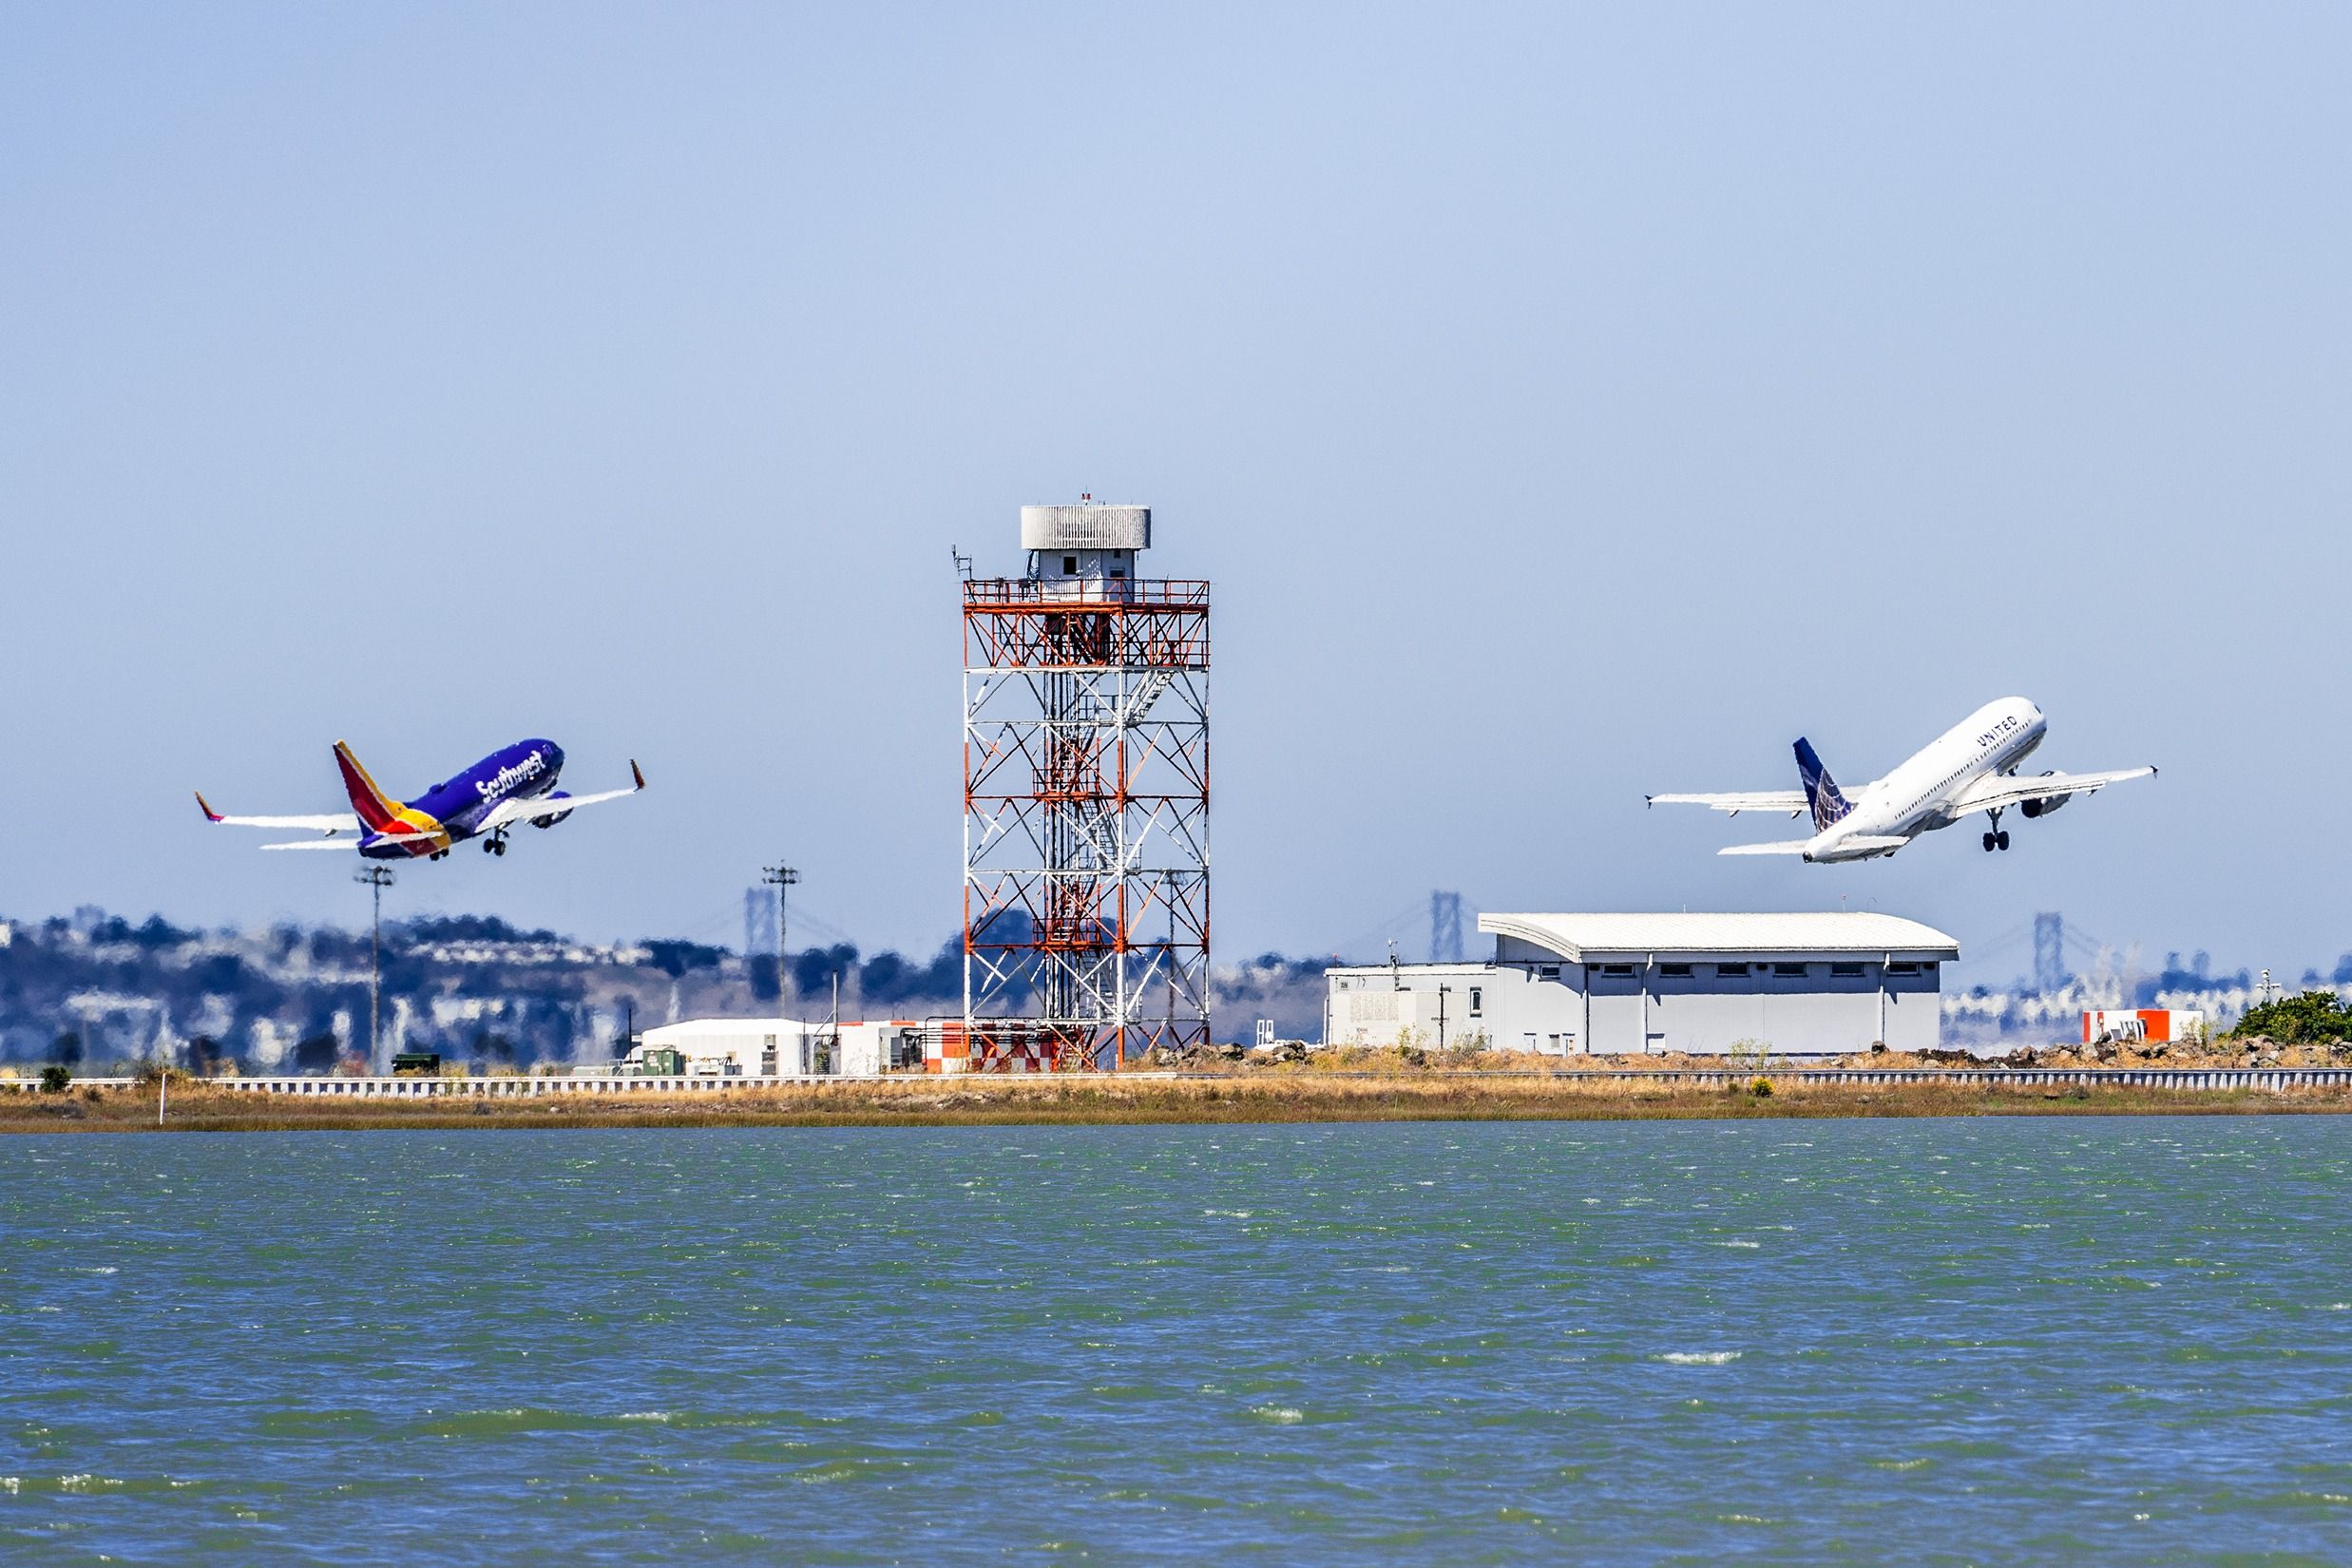 A Southwest Airlines Boeing 737 and United Airlines Airbus A320 performing a parallel takeoff at San Francisco International Airport.